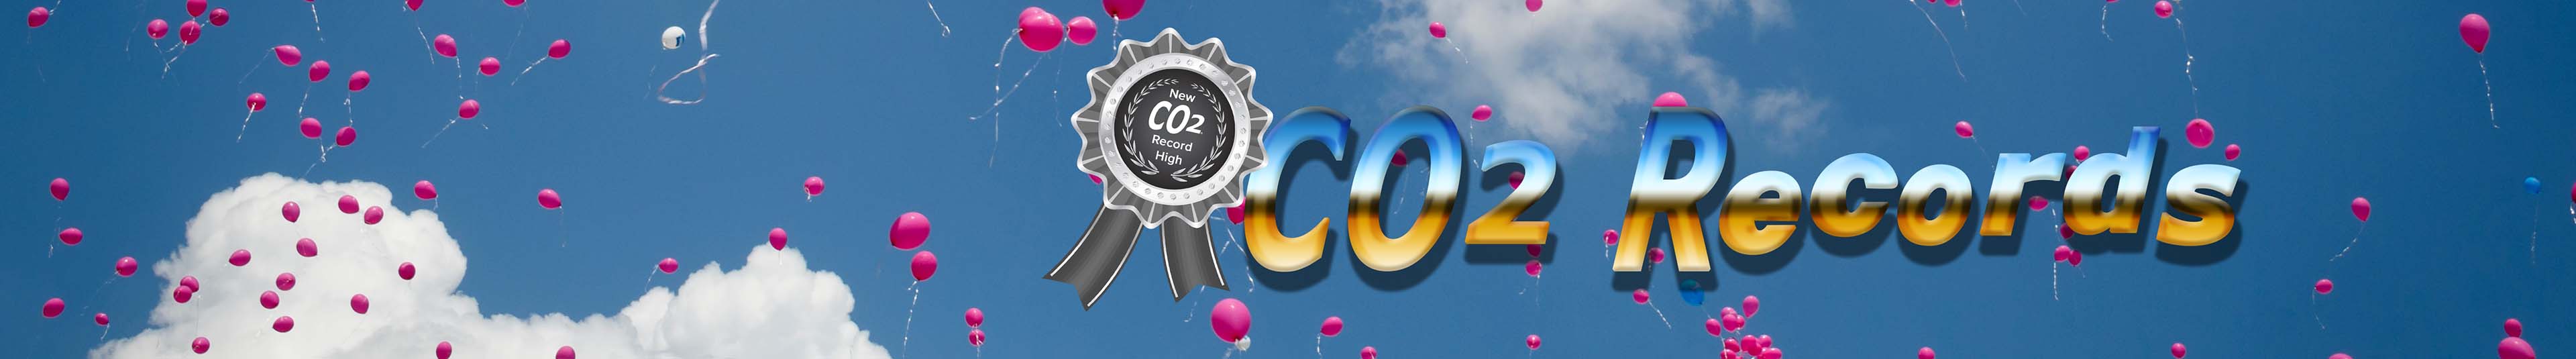 co2 earth co2 records banner